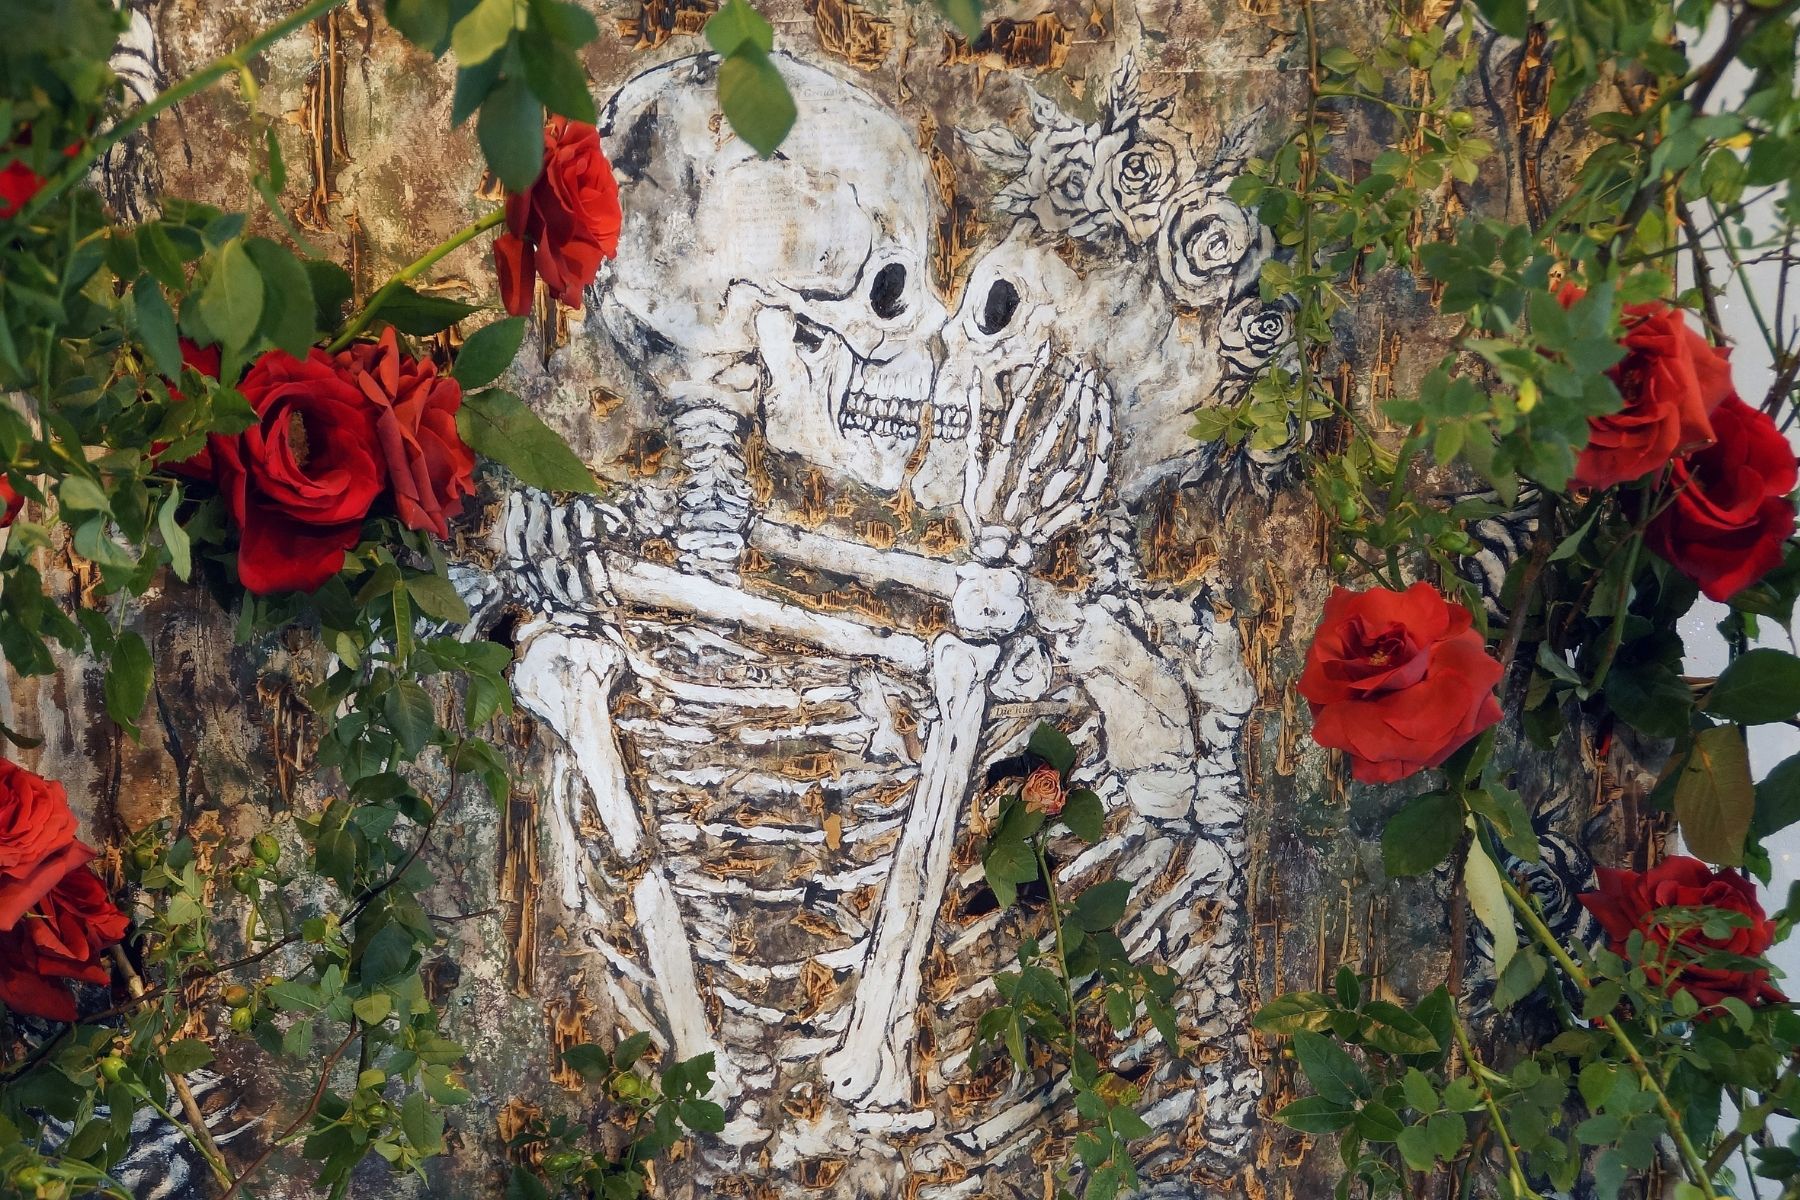 Kowalski Asked Me to Be Part of His Art, to Show Love in Its Full Bloom With Red Roses - Blog on Thursd (12)